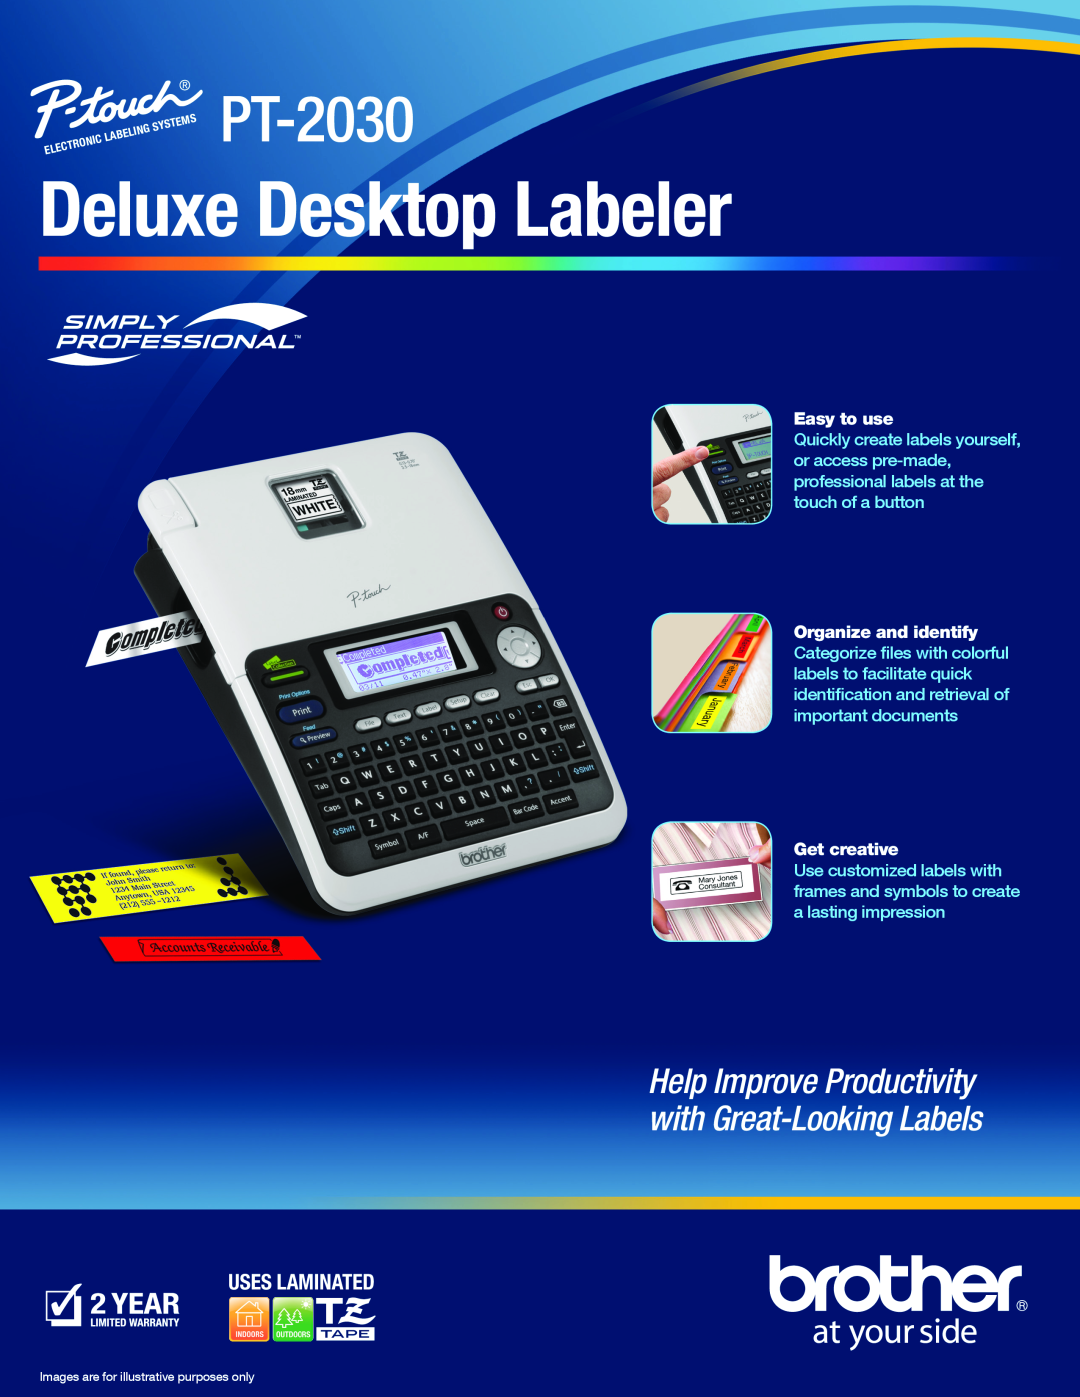 Brother PT-2030 manual Deluxe Desktop Labeler, Help Improve Productivity with Great-Looking Labels, Uses Laminated 